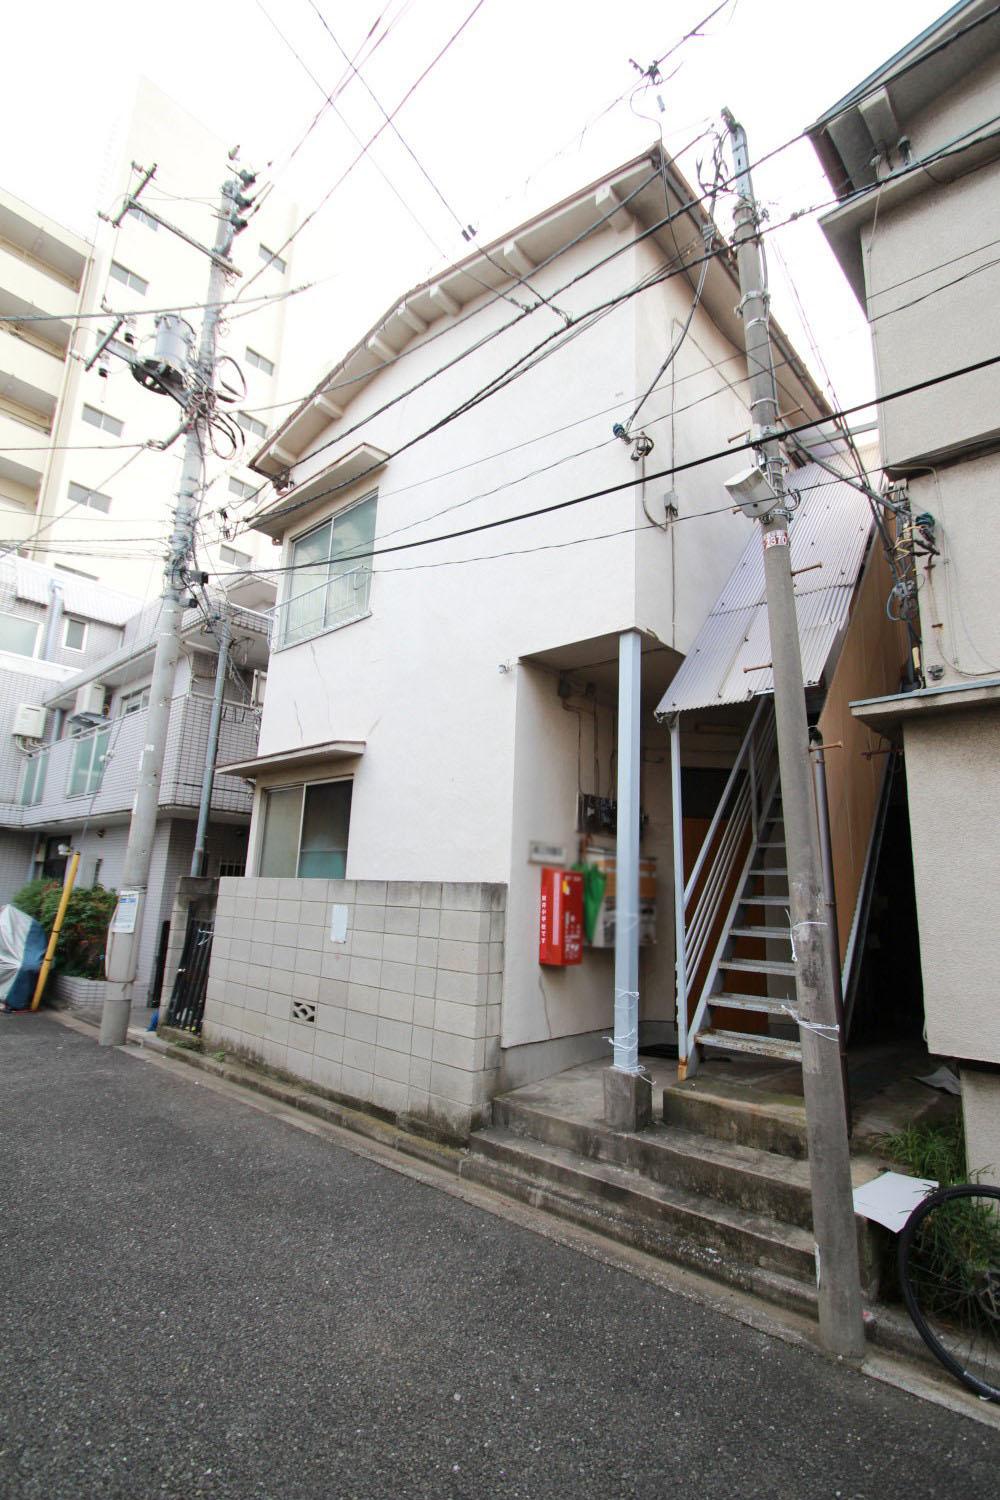 Local land photo. Land sale of Nakano Arai 1-chome. Since the building conditions is not attached, You can building your favorite House manufacturer. Large 4LDK reference plan are available. Please feel free to contact. 